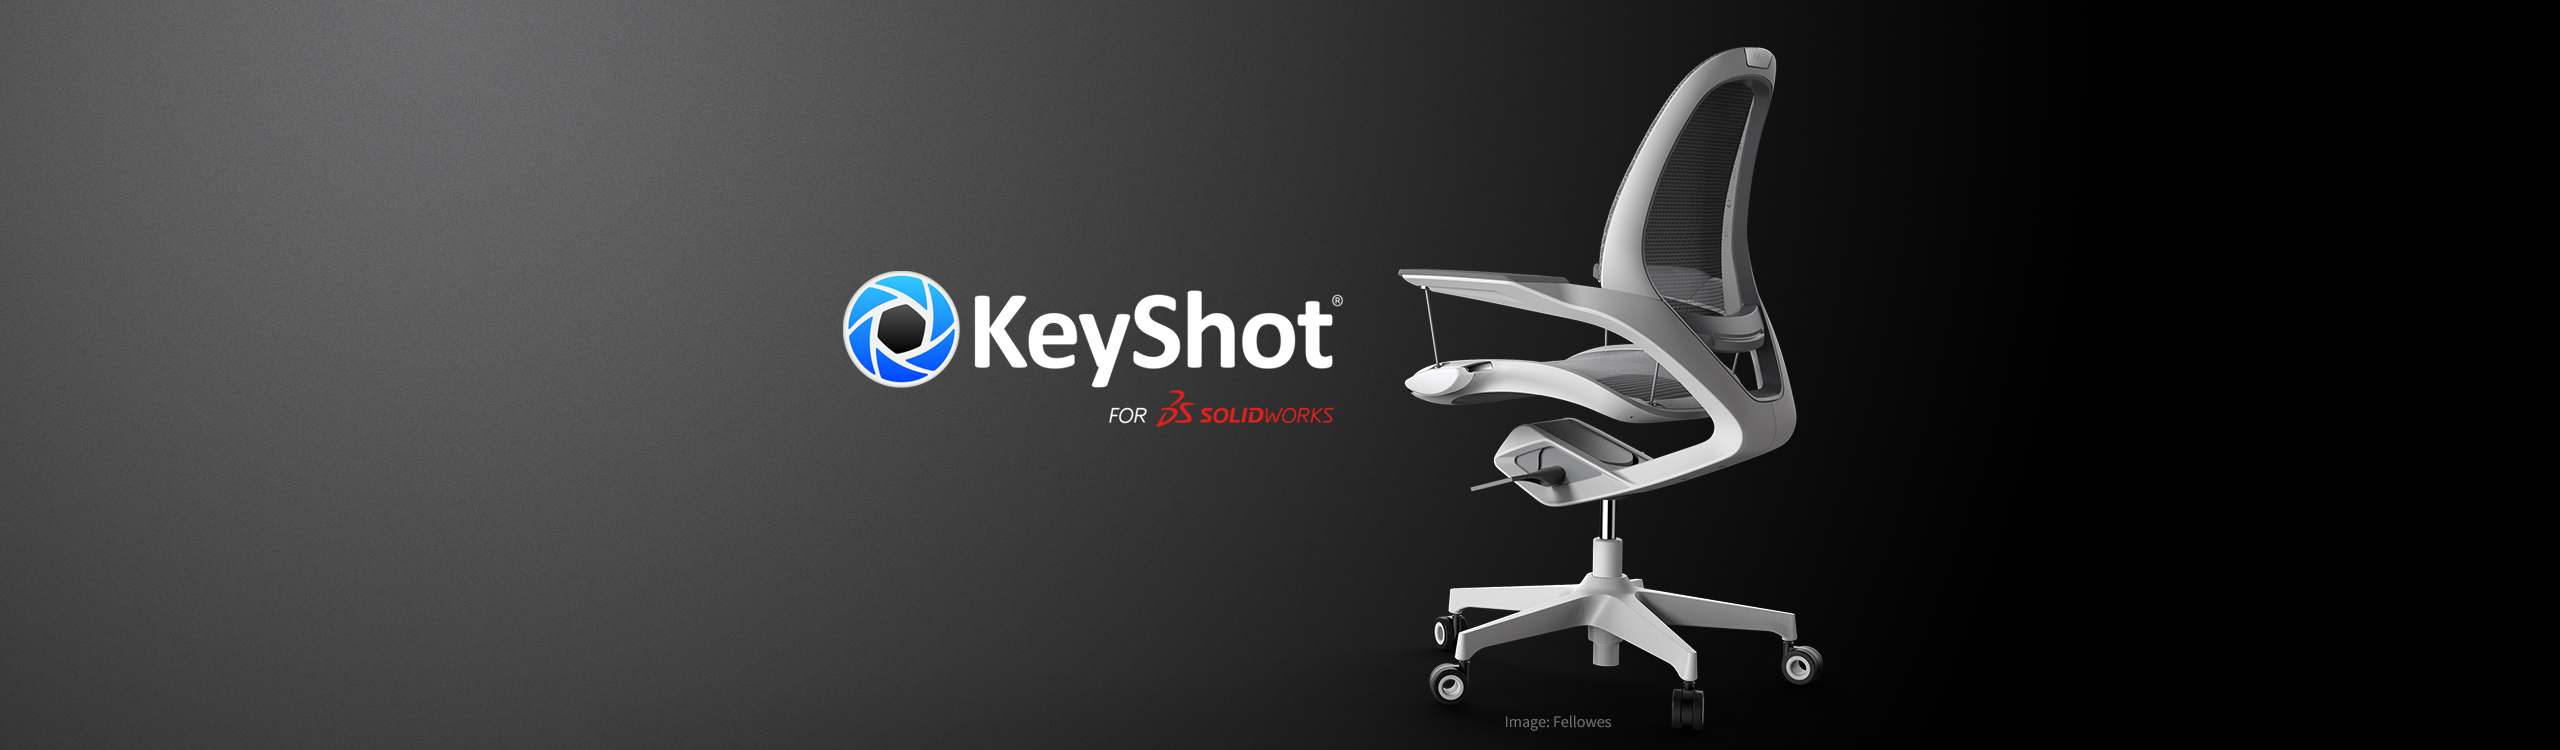 KeyShot for SOLIDWORKS Edition Available Now